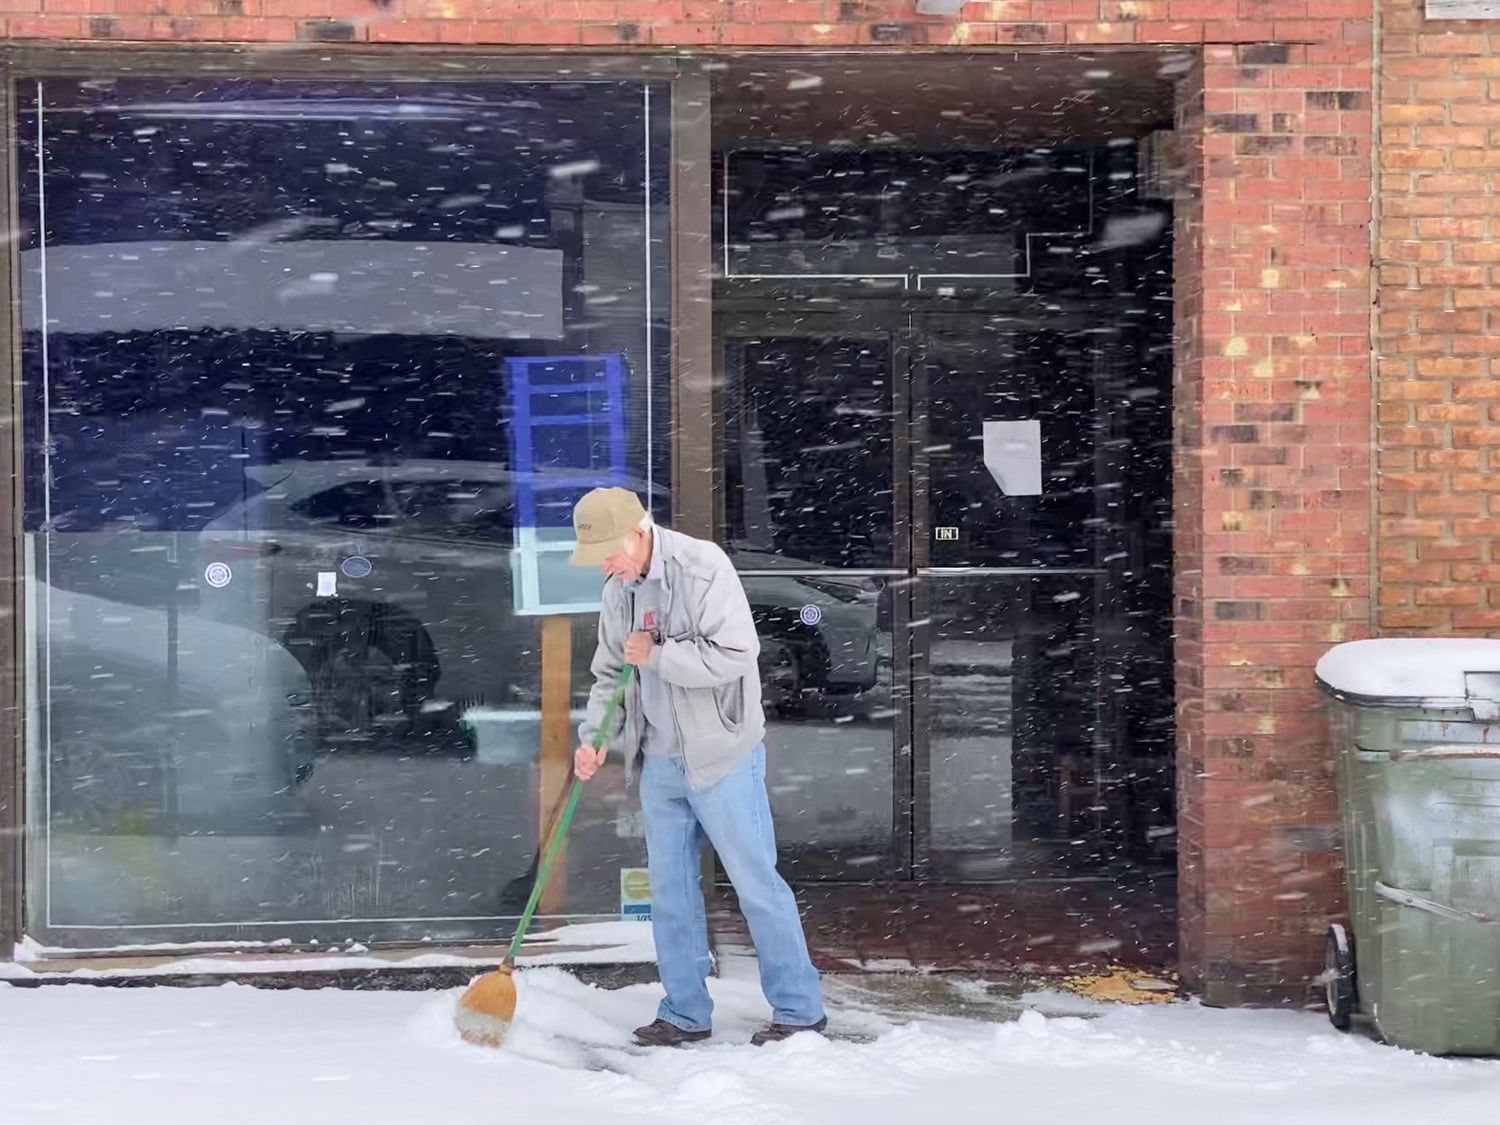 A man sweeps snow in front of Lee's Game Room on South Main Street in Hopkinsville on Thursday, Jan. 6, 2022. (Photo by Jennifer P. Brown)